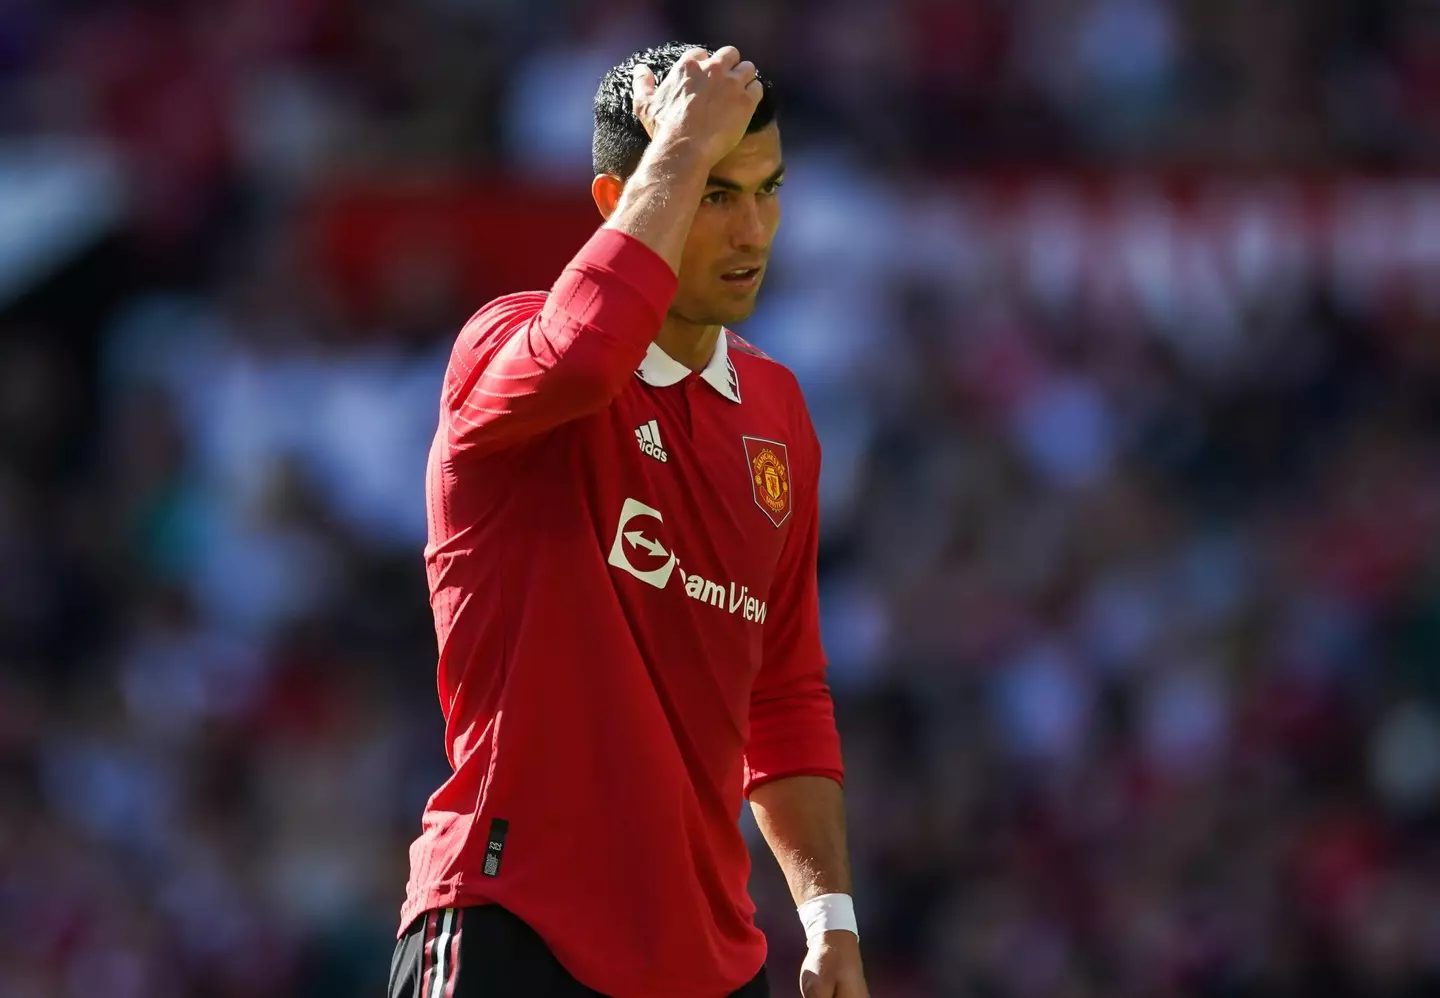 Ronaldo has cut a frustrated figure at times this season. Image: Alamy